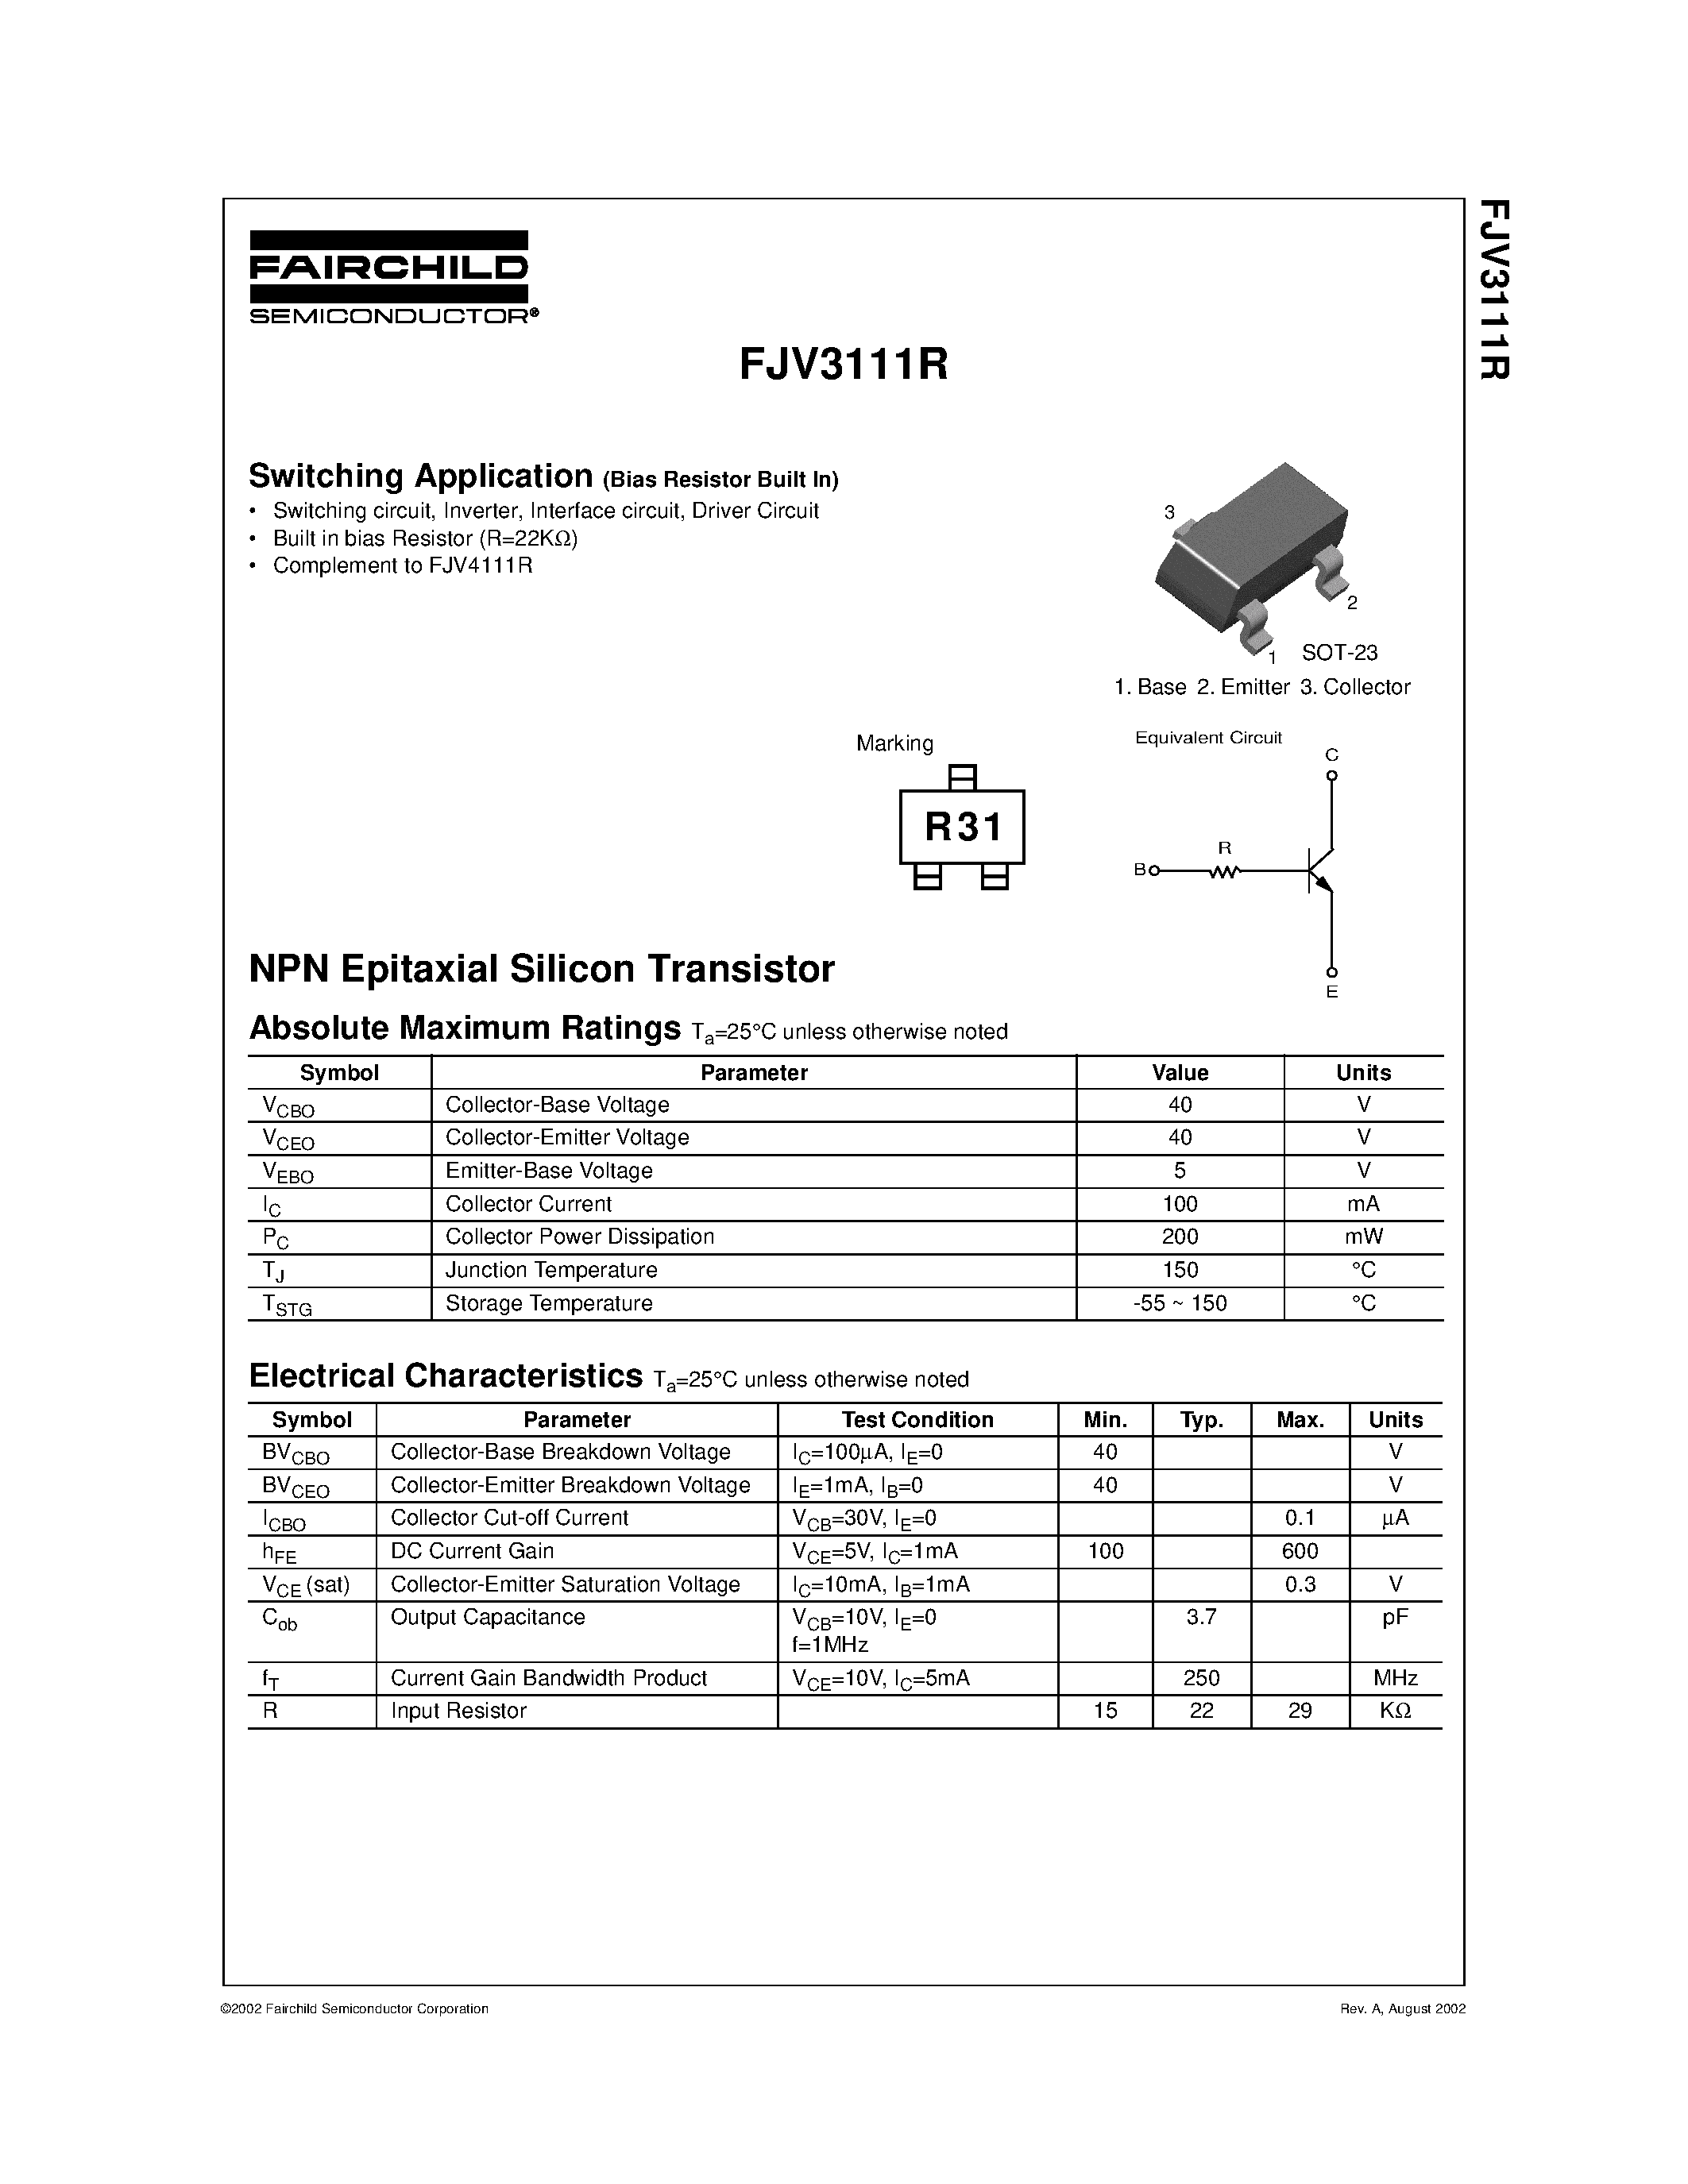 Datasheet FJV3111 - NPN Epitaxial Silicon Transistor page 1